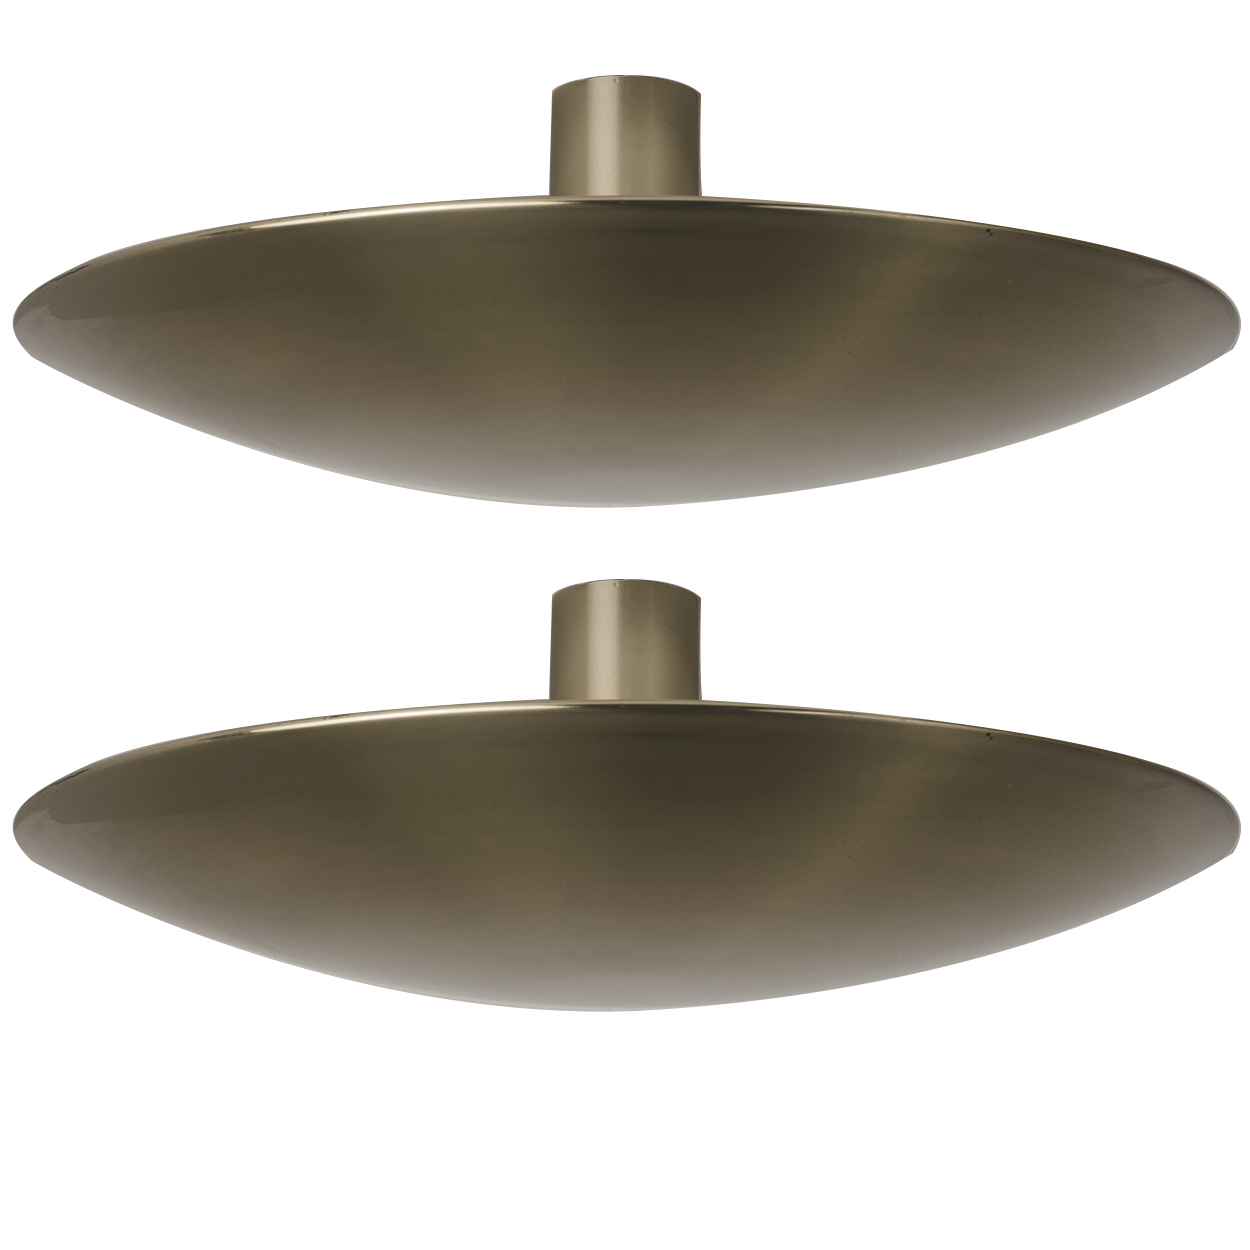 1 of the 2 Florian Schulz Nickel Plated Flush Mount Ceiling / Wall Lights